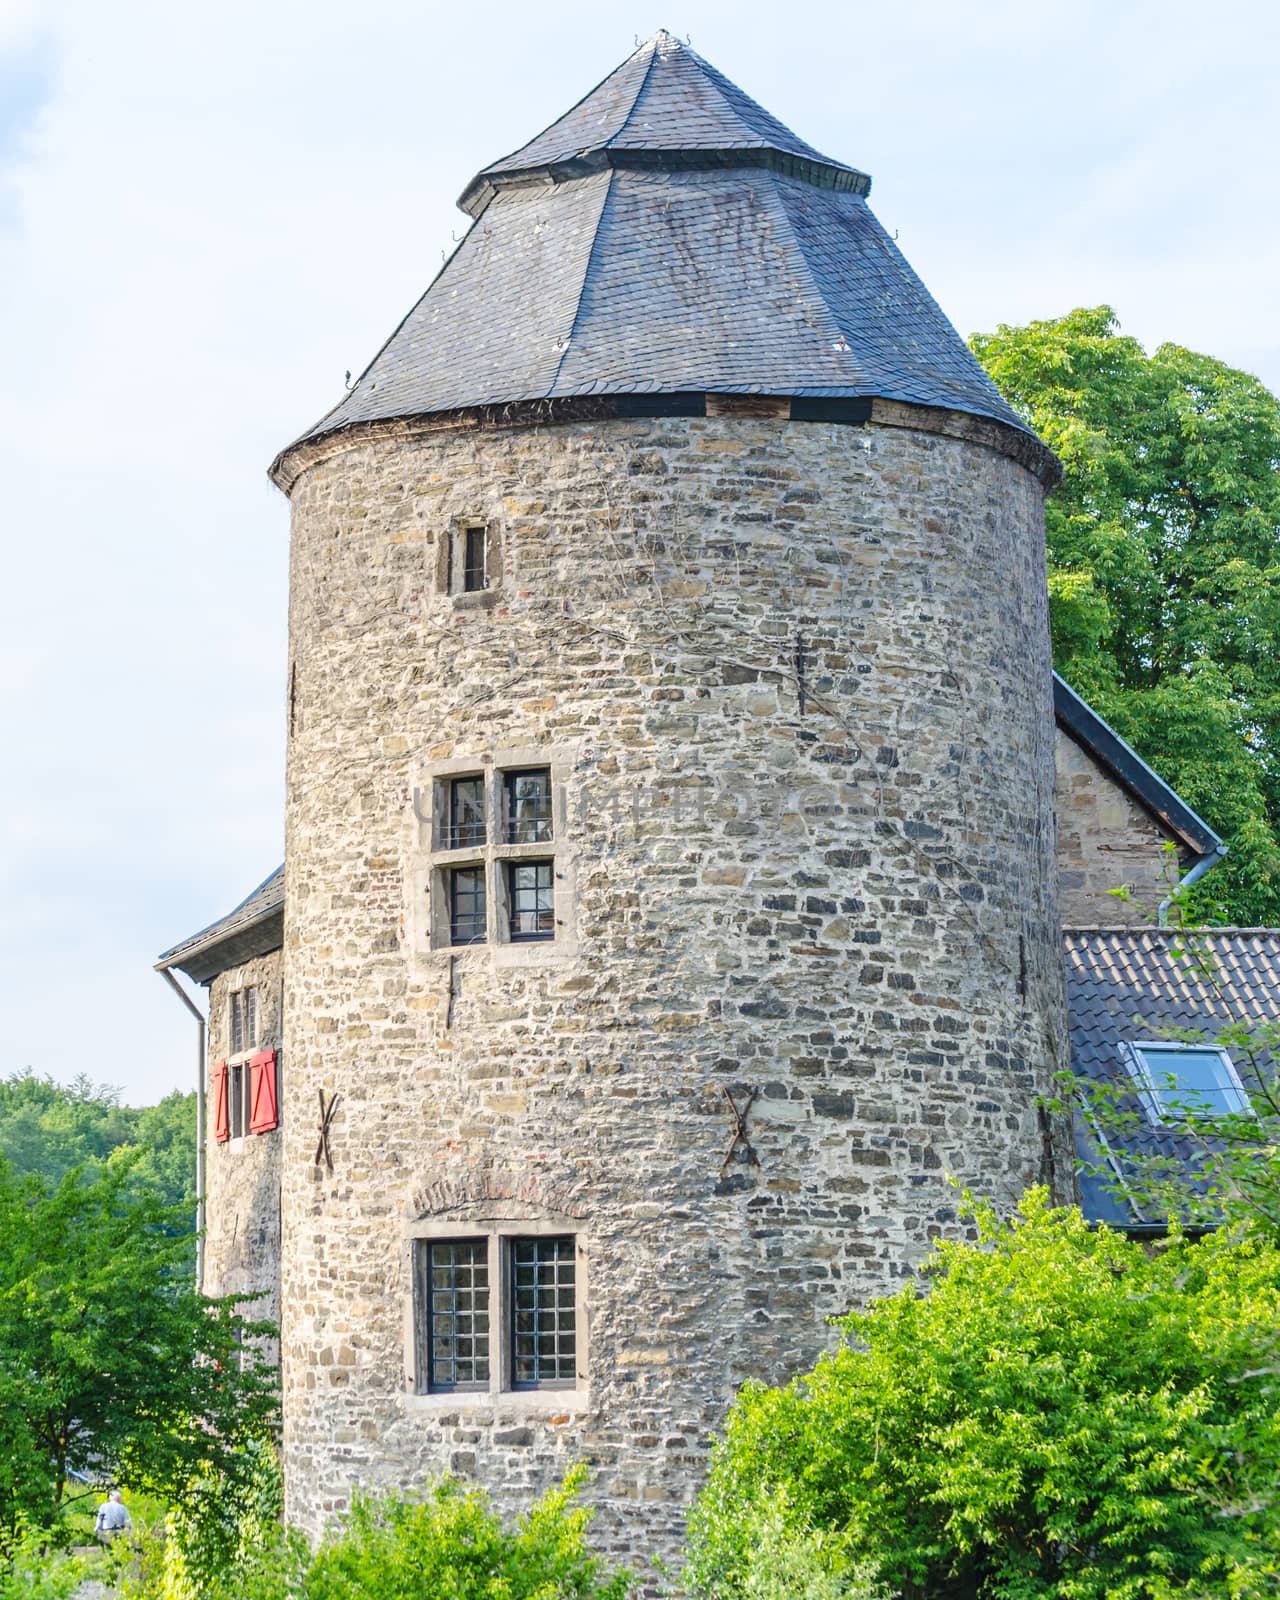 Age castle tower against blue sky and other historic parts of the building.